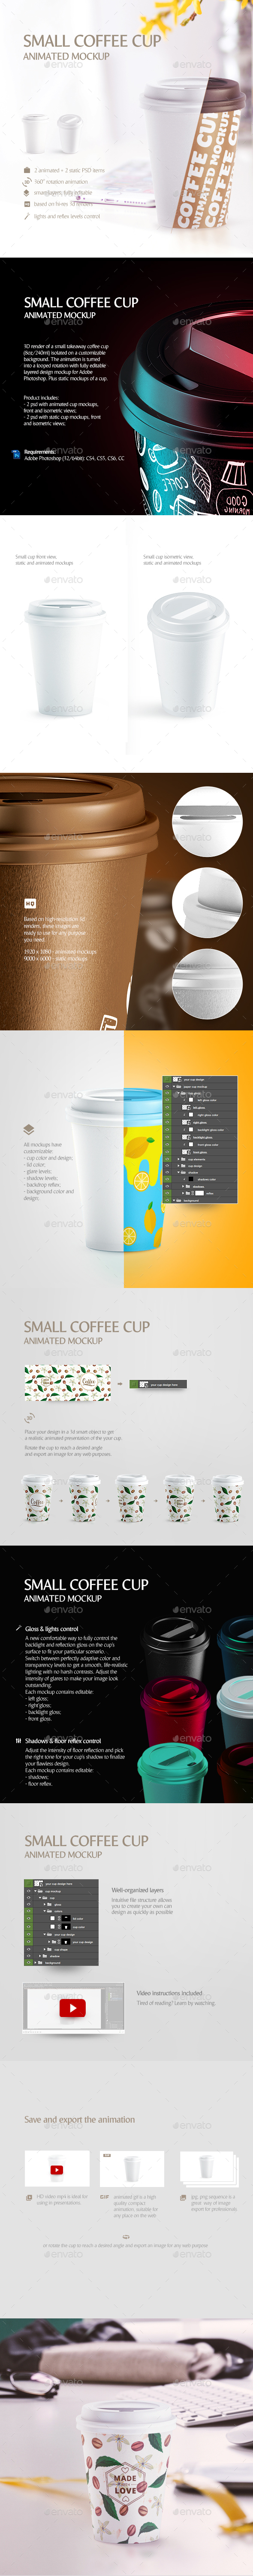 Download Small Coffee Cup Animated Mockup By Rebrandy Graphicriver